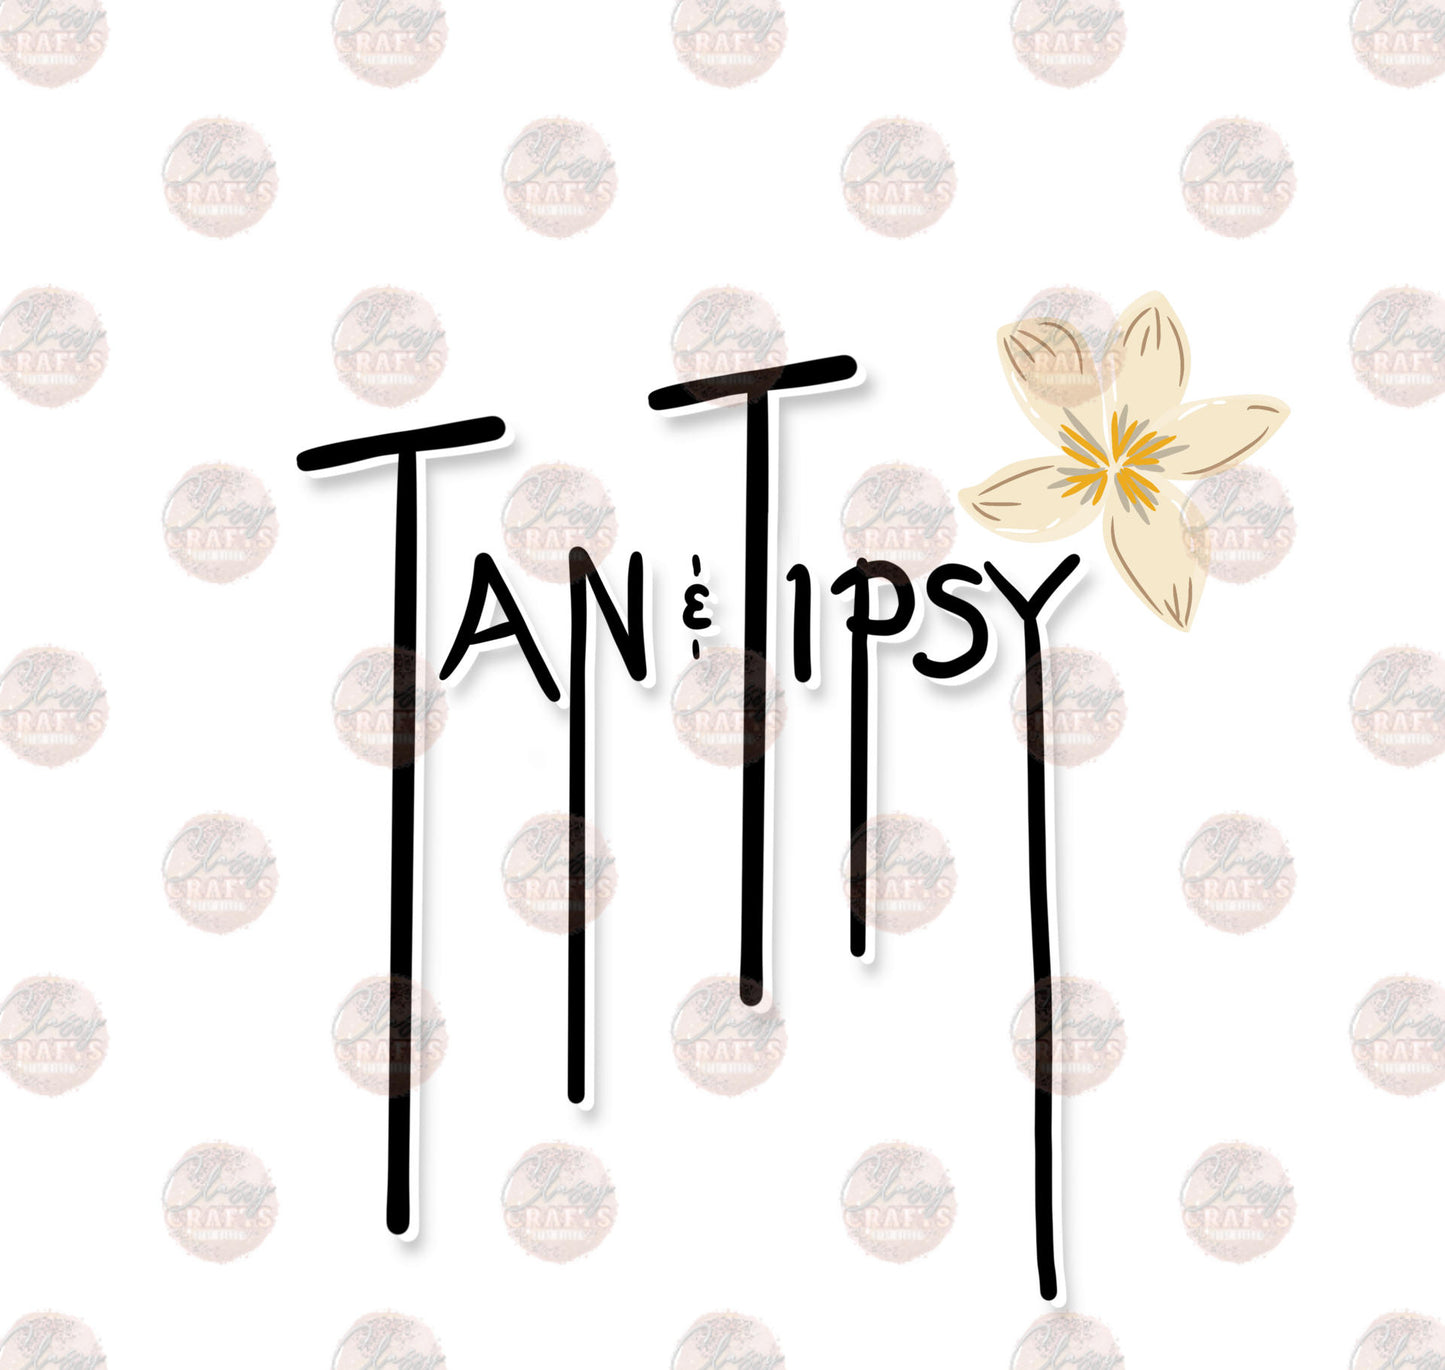 Tan & Tipsy with Flower Outlined - Sublimation Transfer